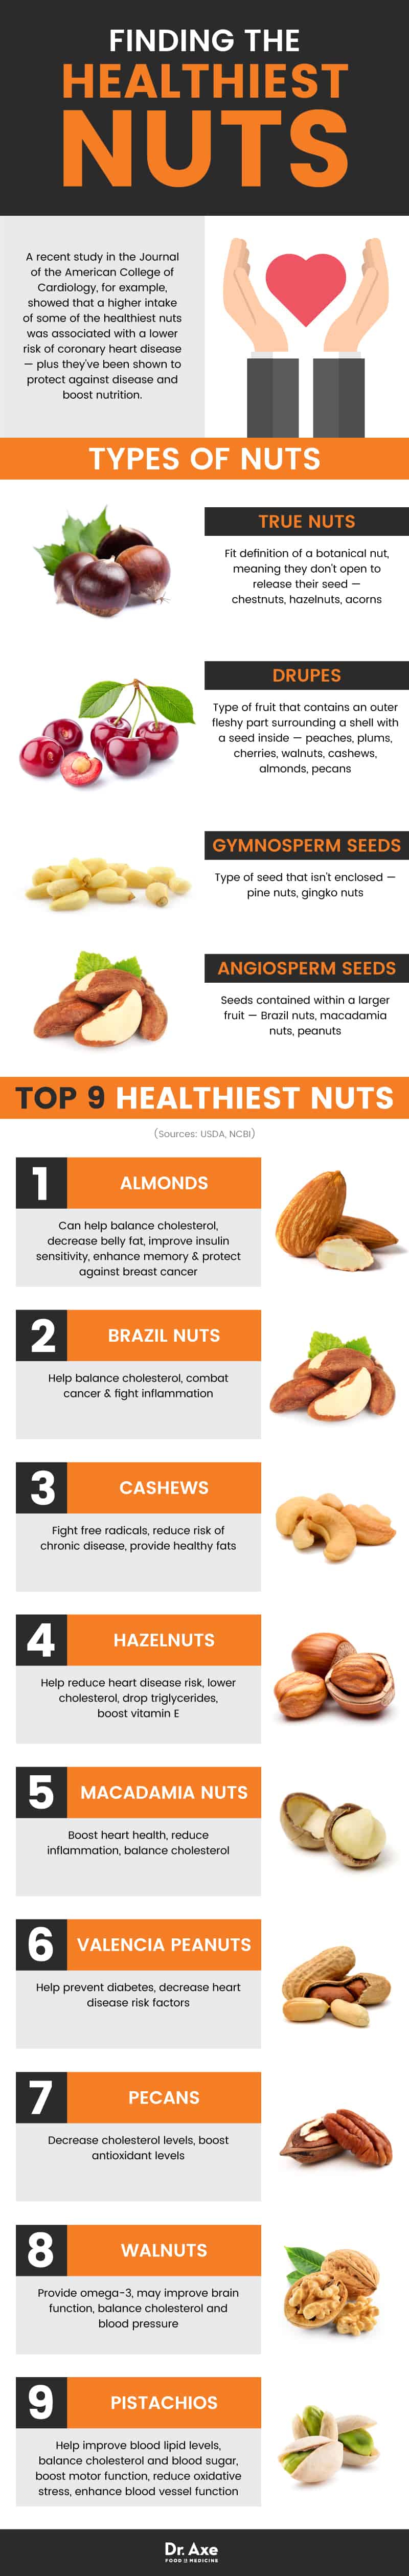 Healthiest nuts - Dr. Axe